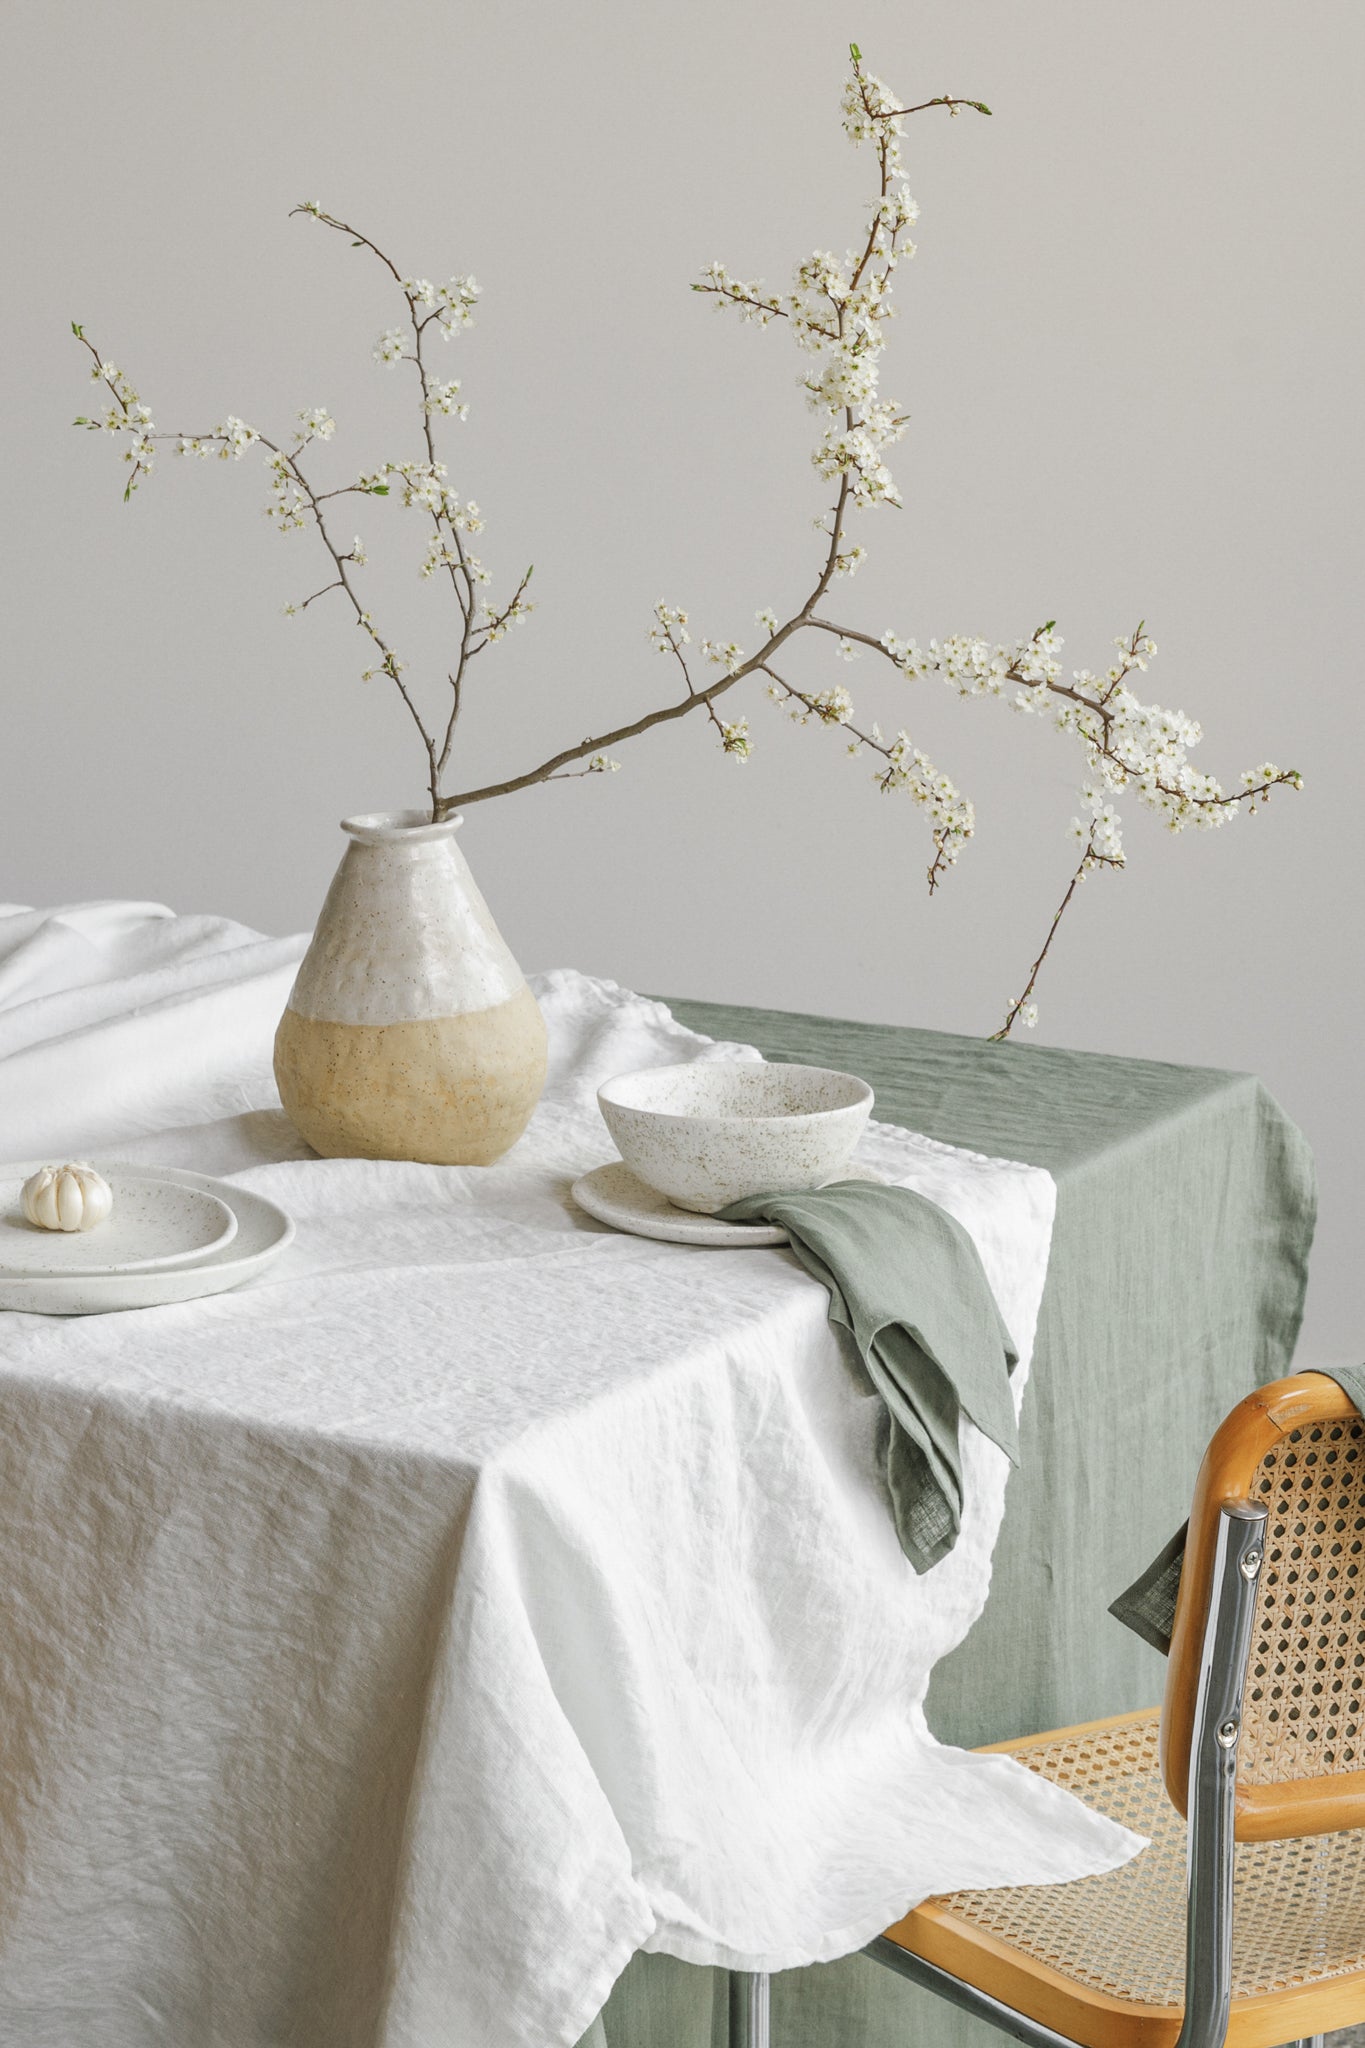 Tablecloth / White